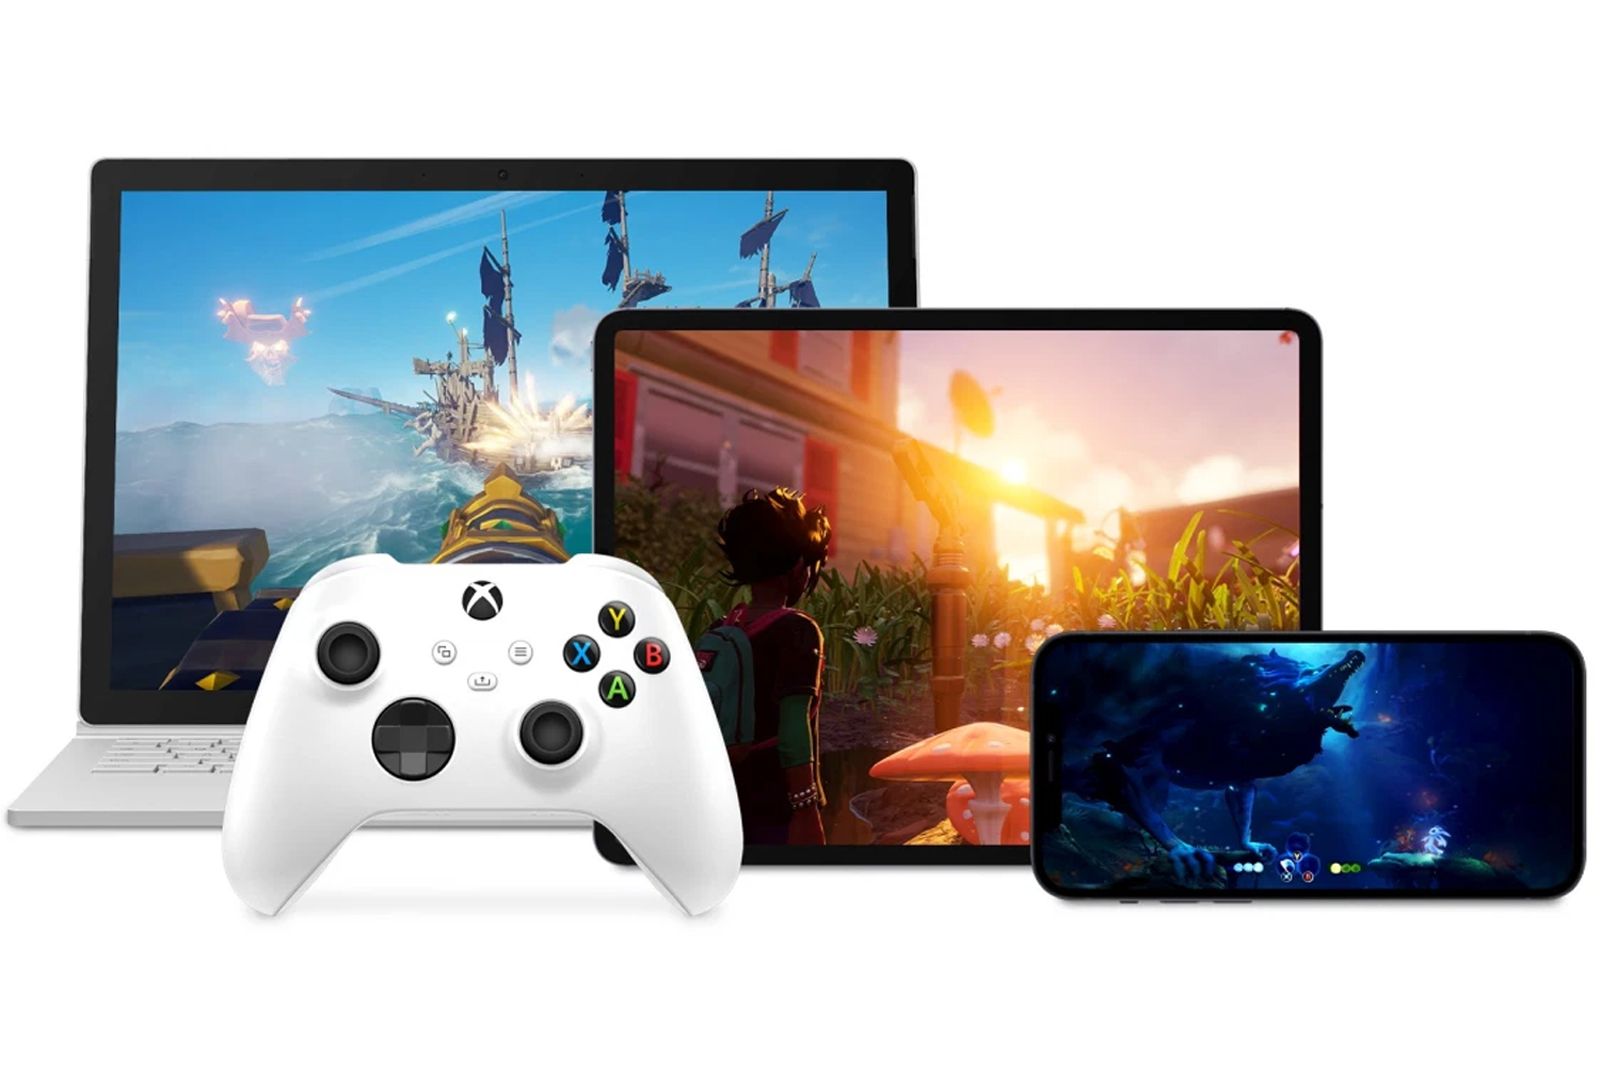 Xbox Cloud Gaming beta is finally here for Windows 10 photo 1